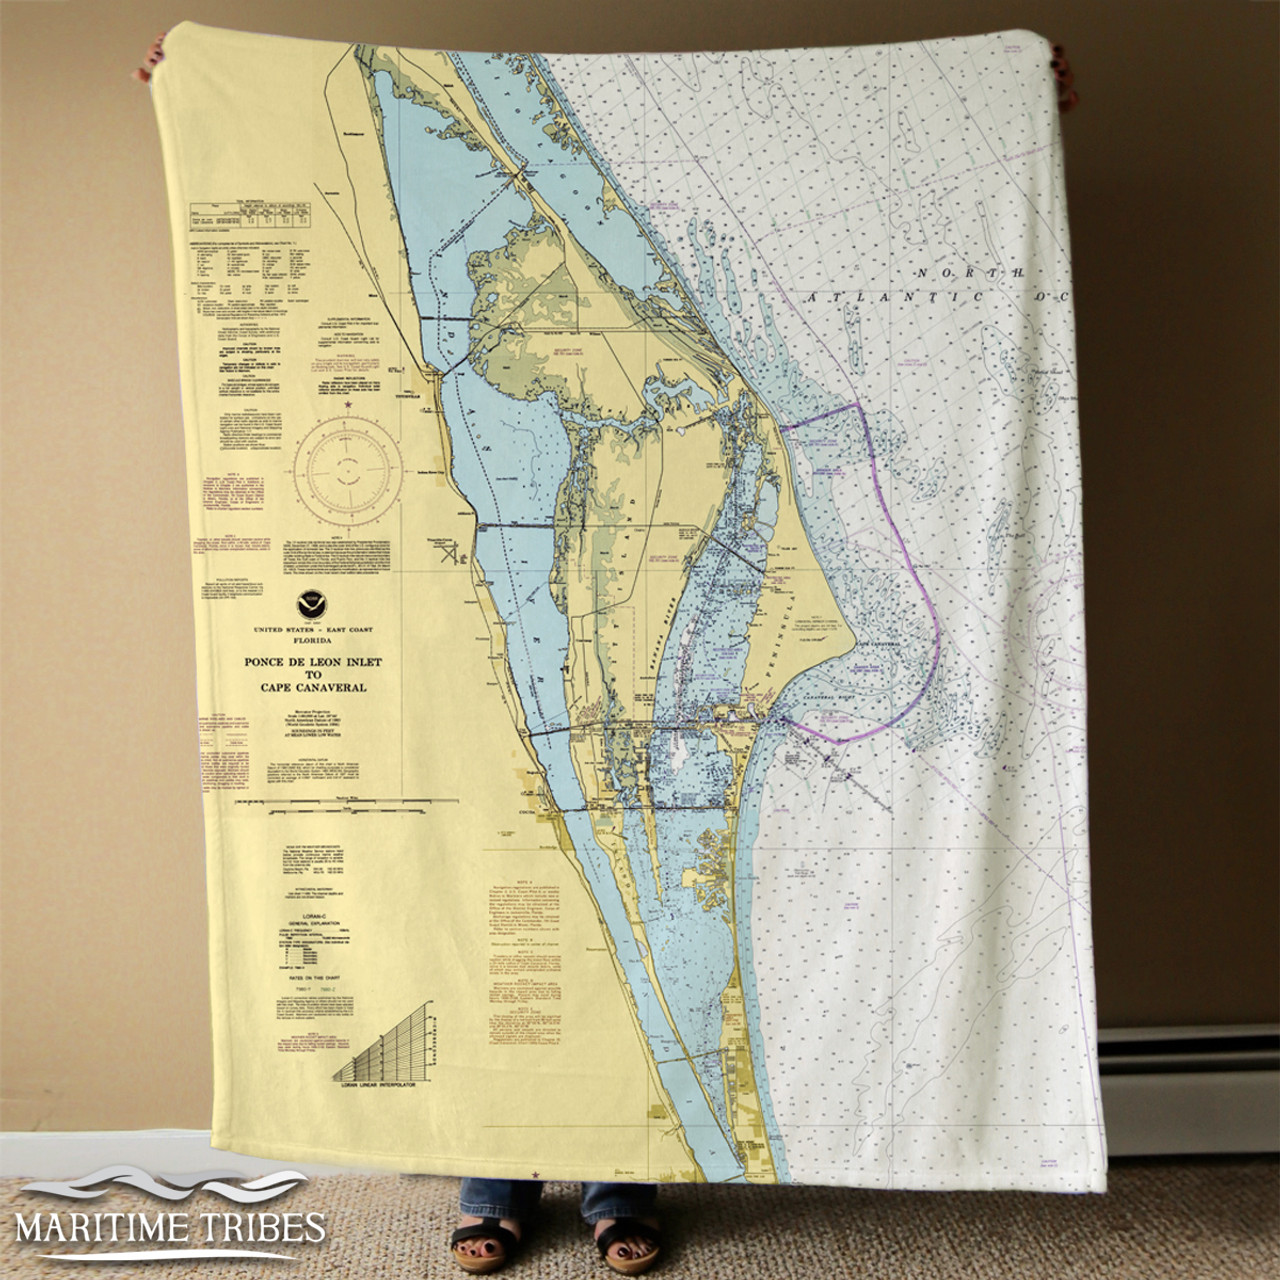 Nautical Chart Blanket –  Southern Cape Canaveral, FL